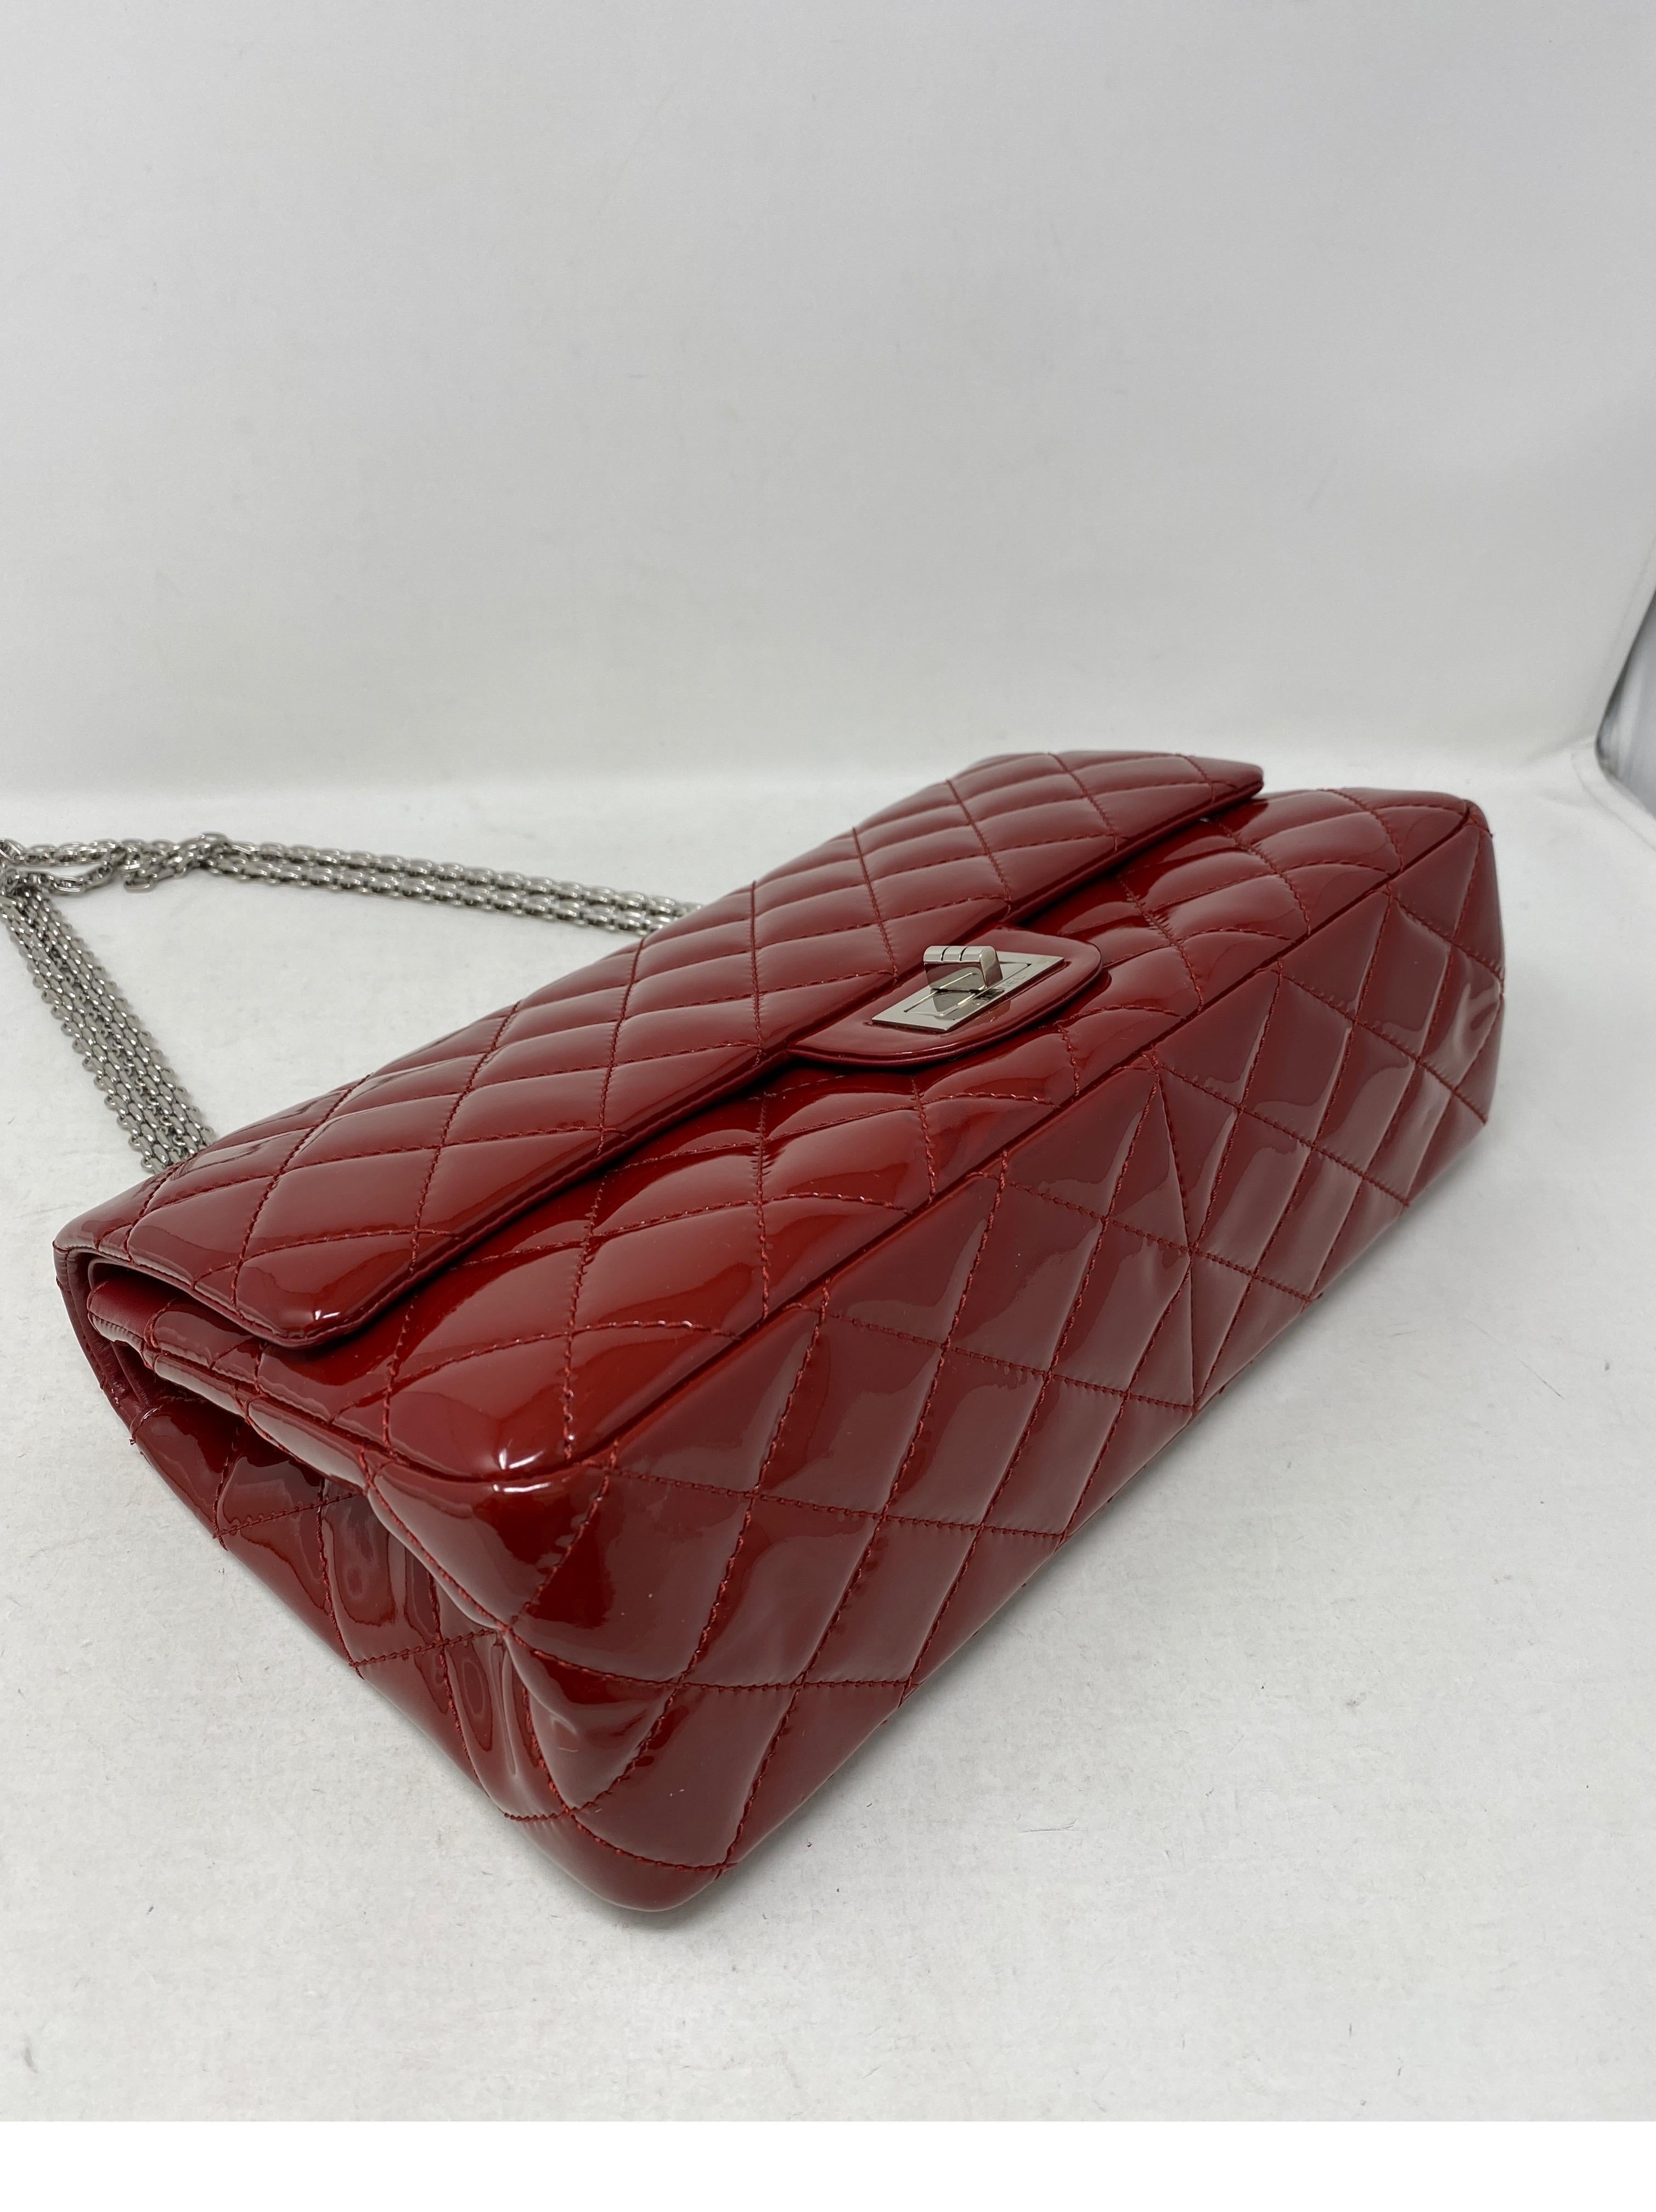 Chanel Red Jumbo Patent Reissue Leather Bag  14